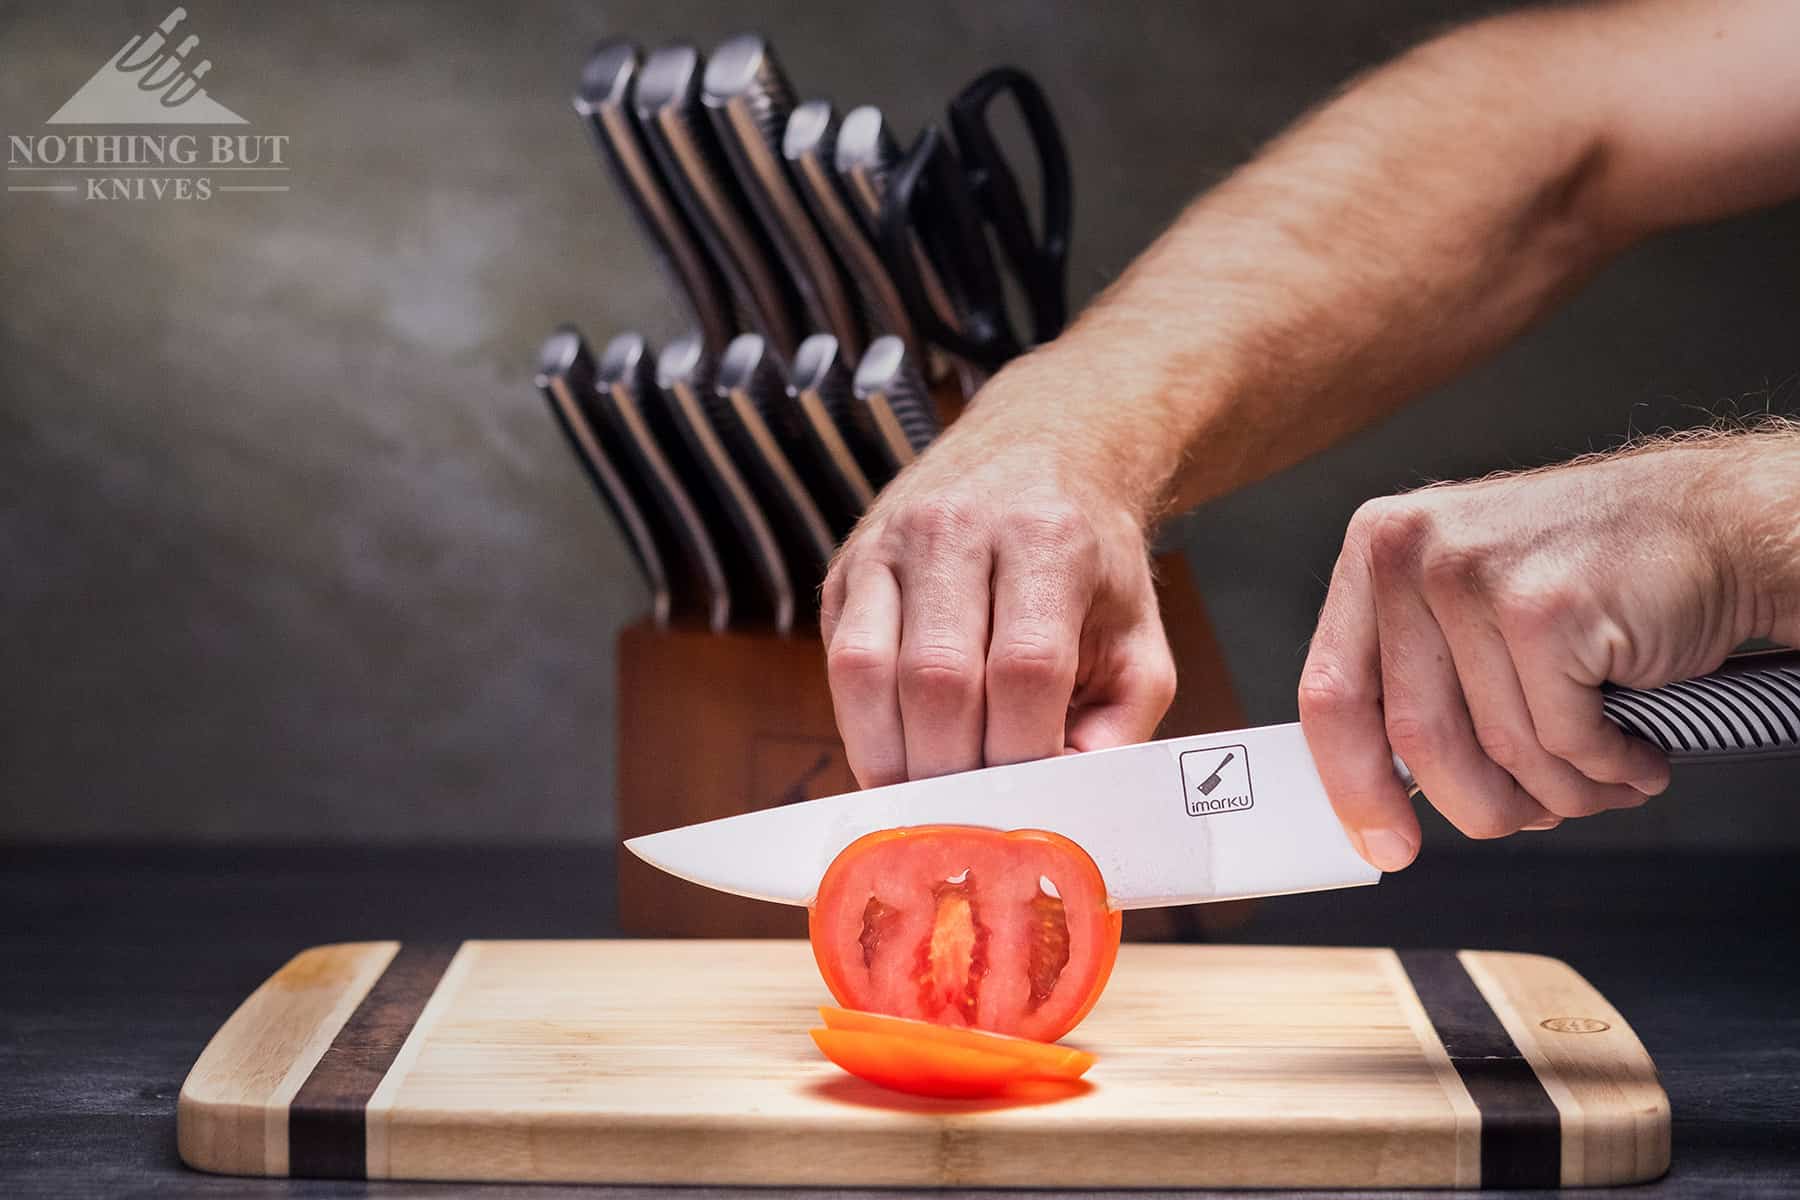 Effortlessly slicing a tomato with the Imarku chef knife for meal prep .